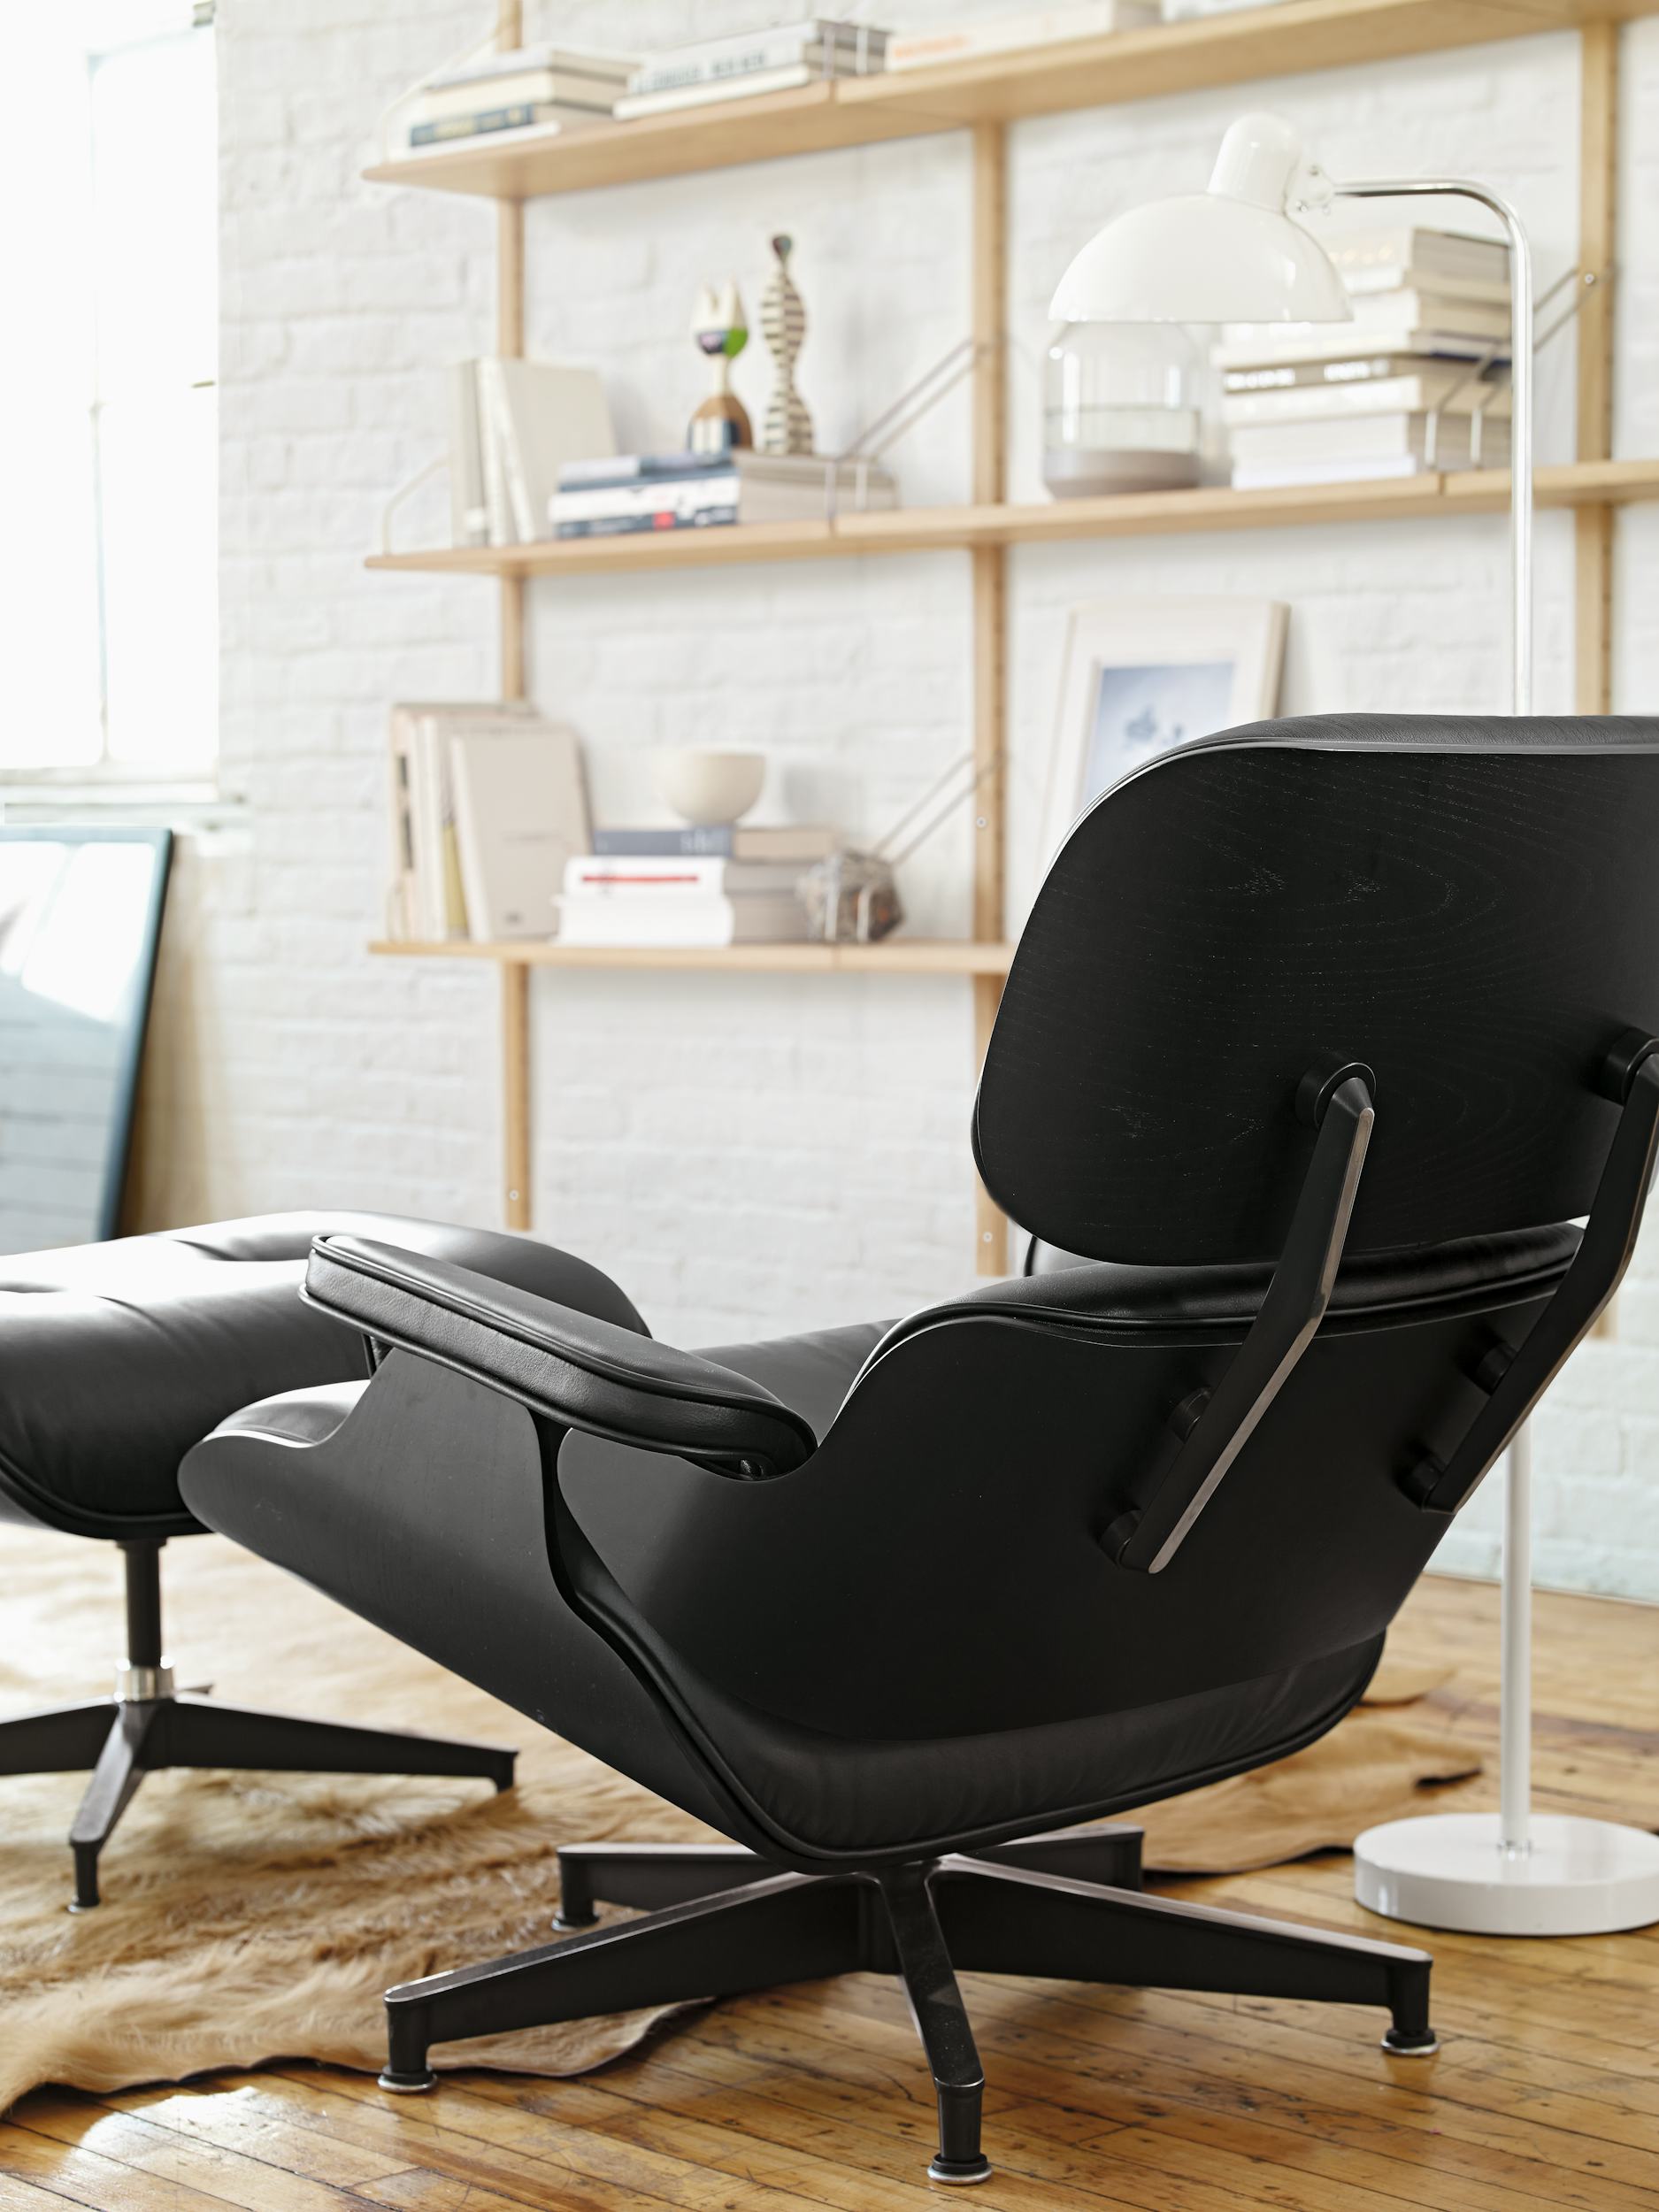 18 Best Lounge Chairs For All Your Leaning Back Needs